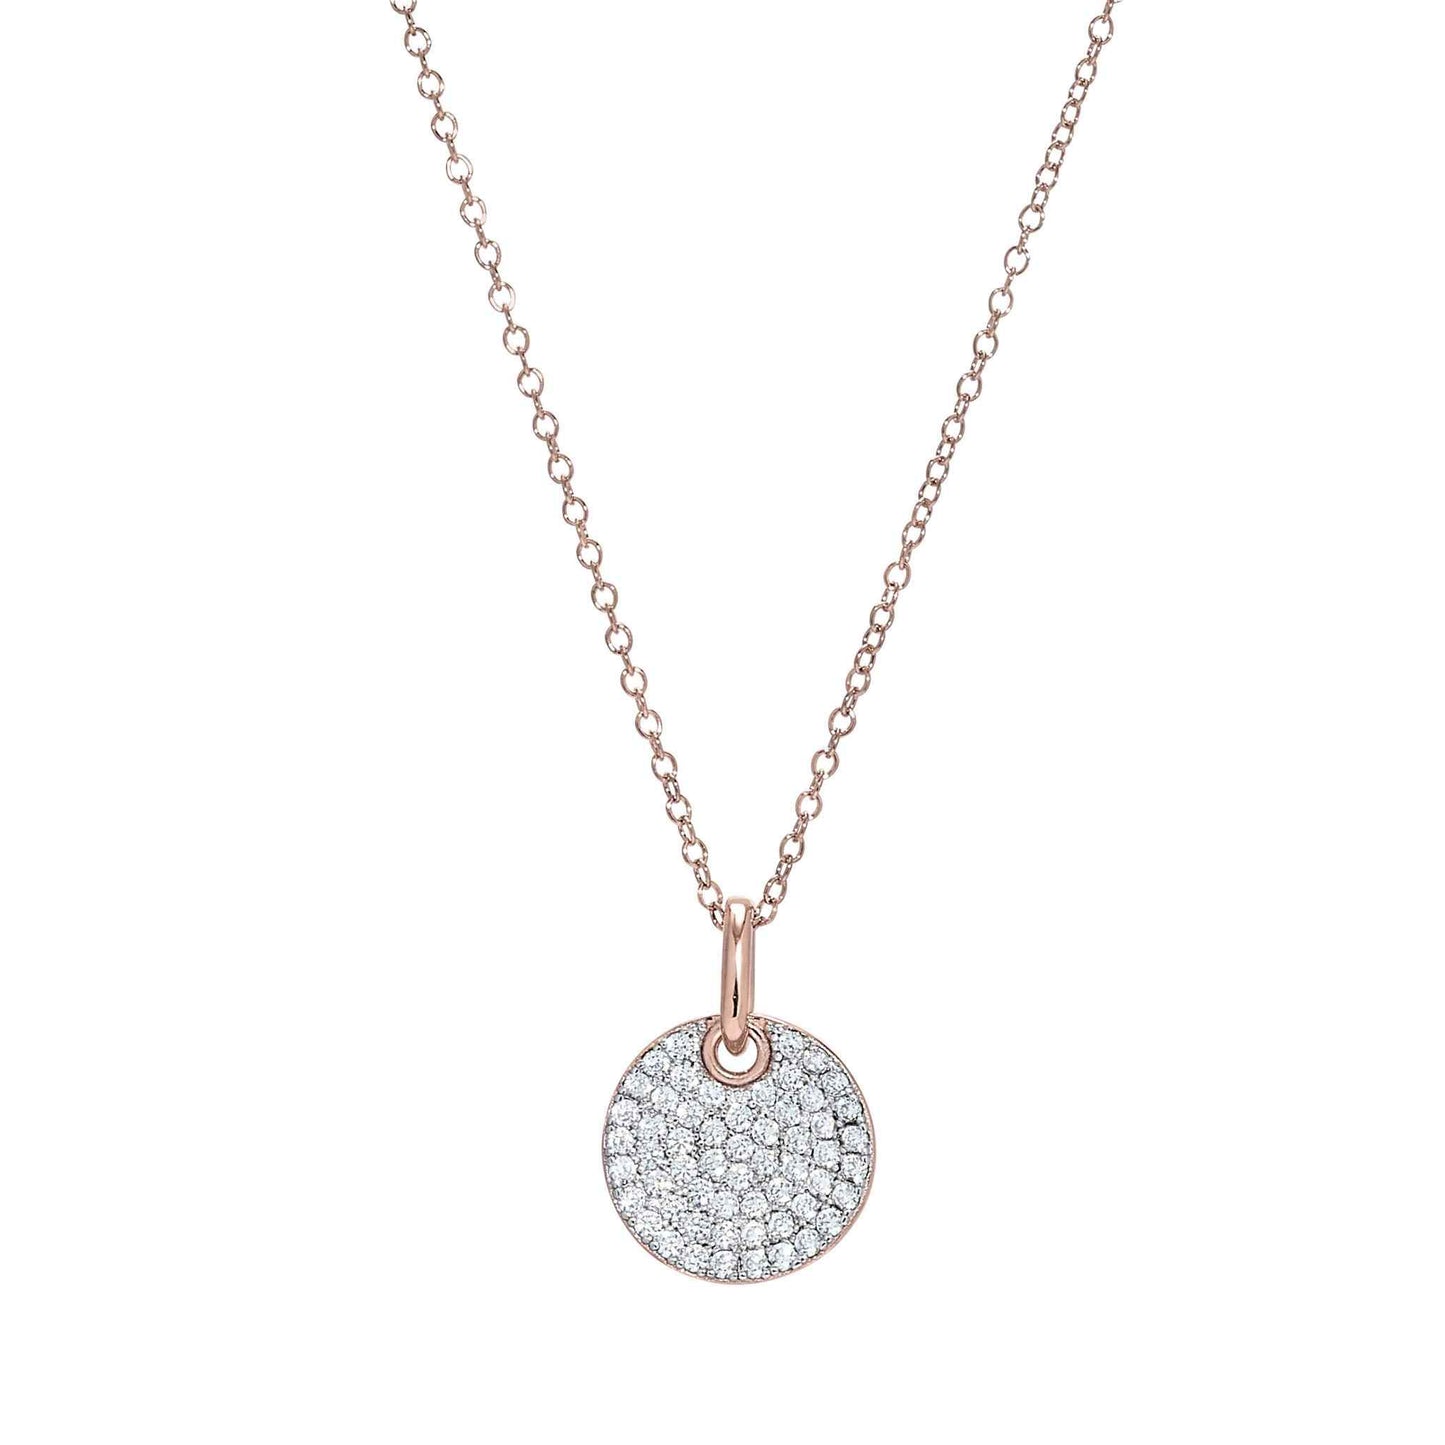 A rose gold and round necklace with simulated diamonds displayed on a neutral white background.